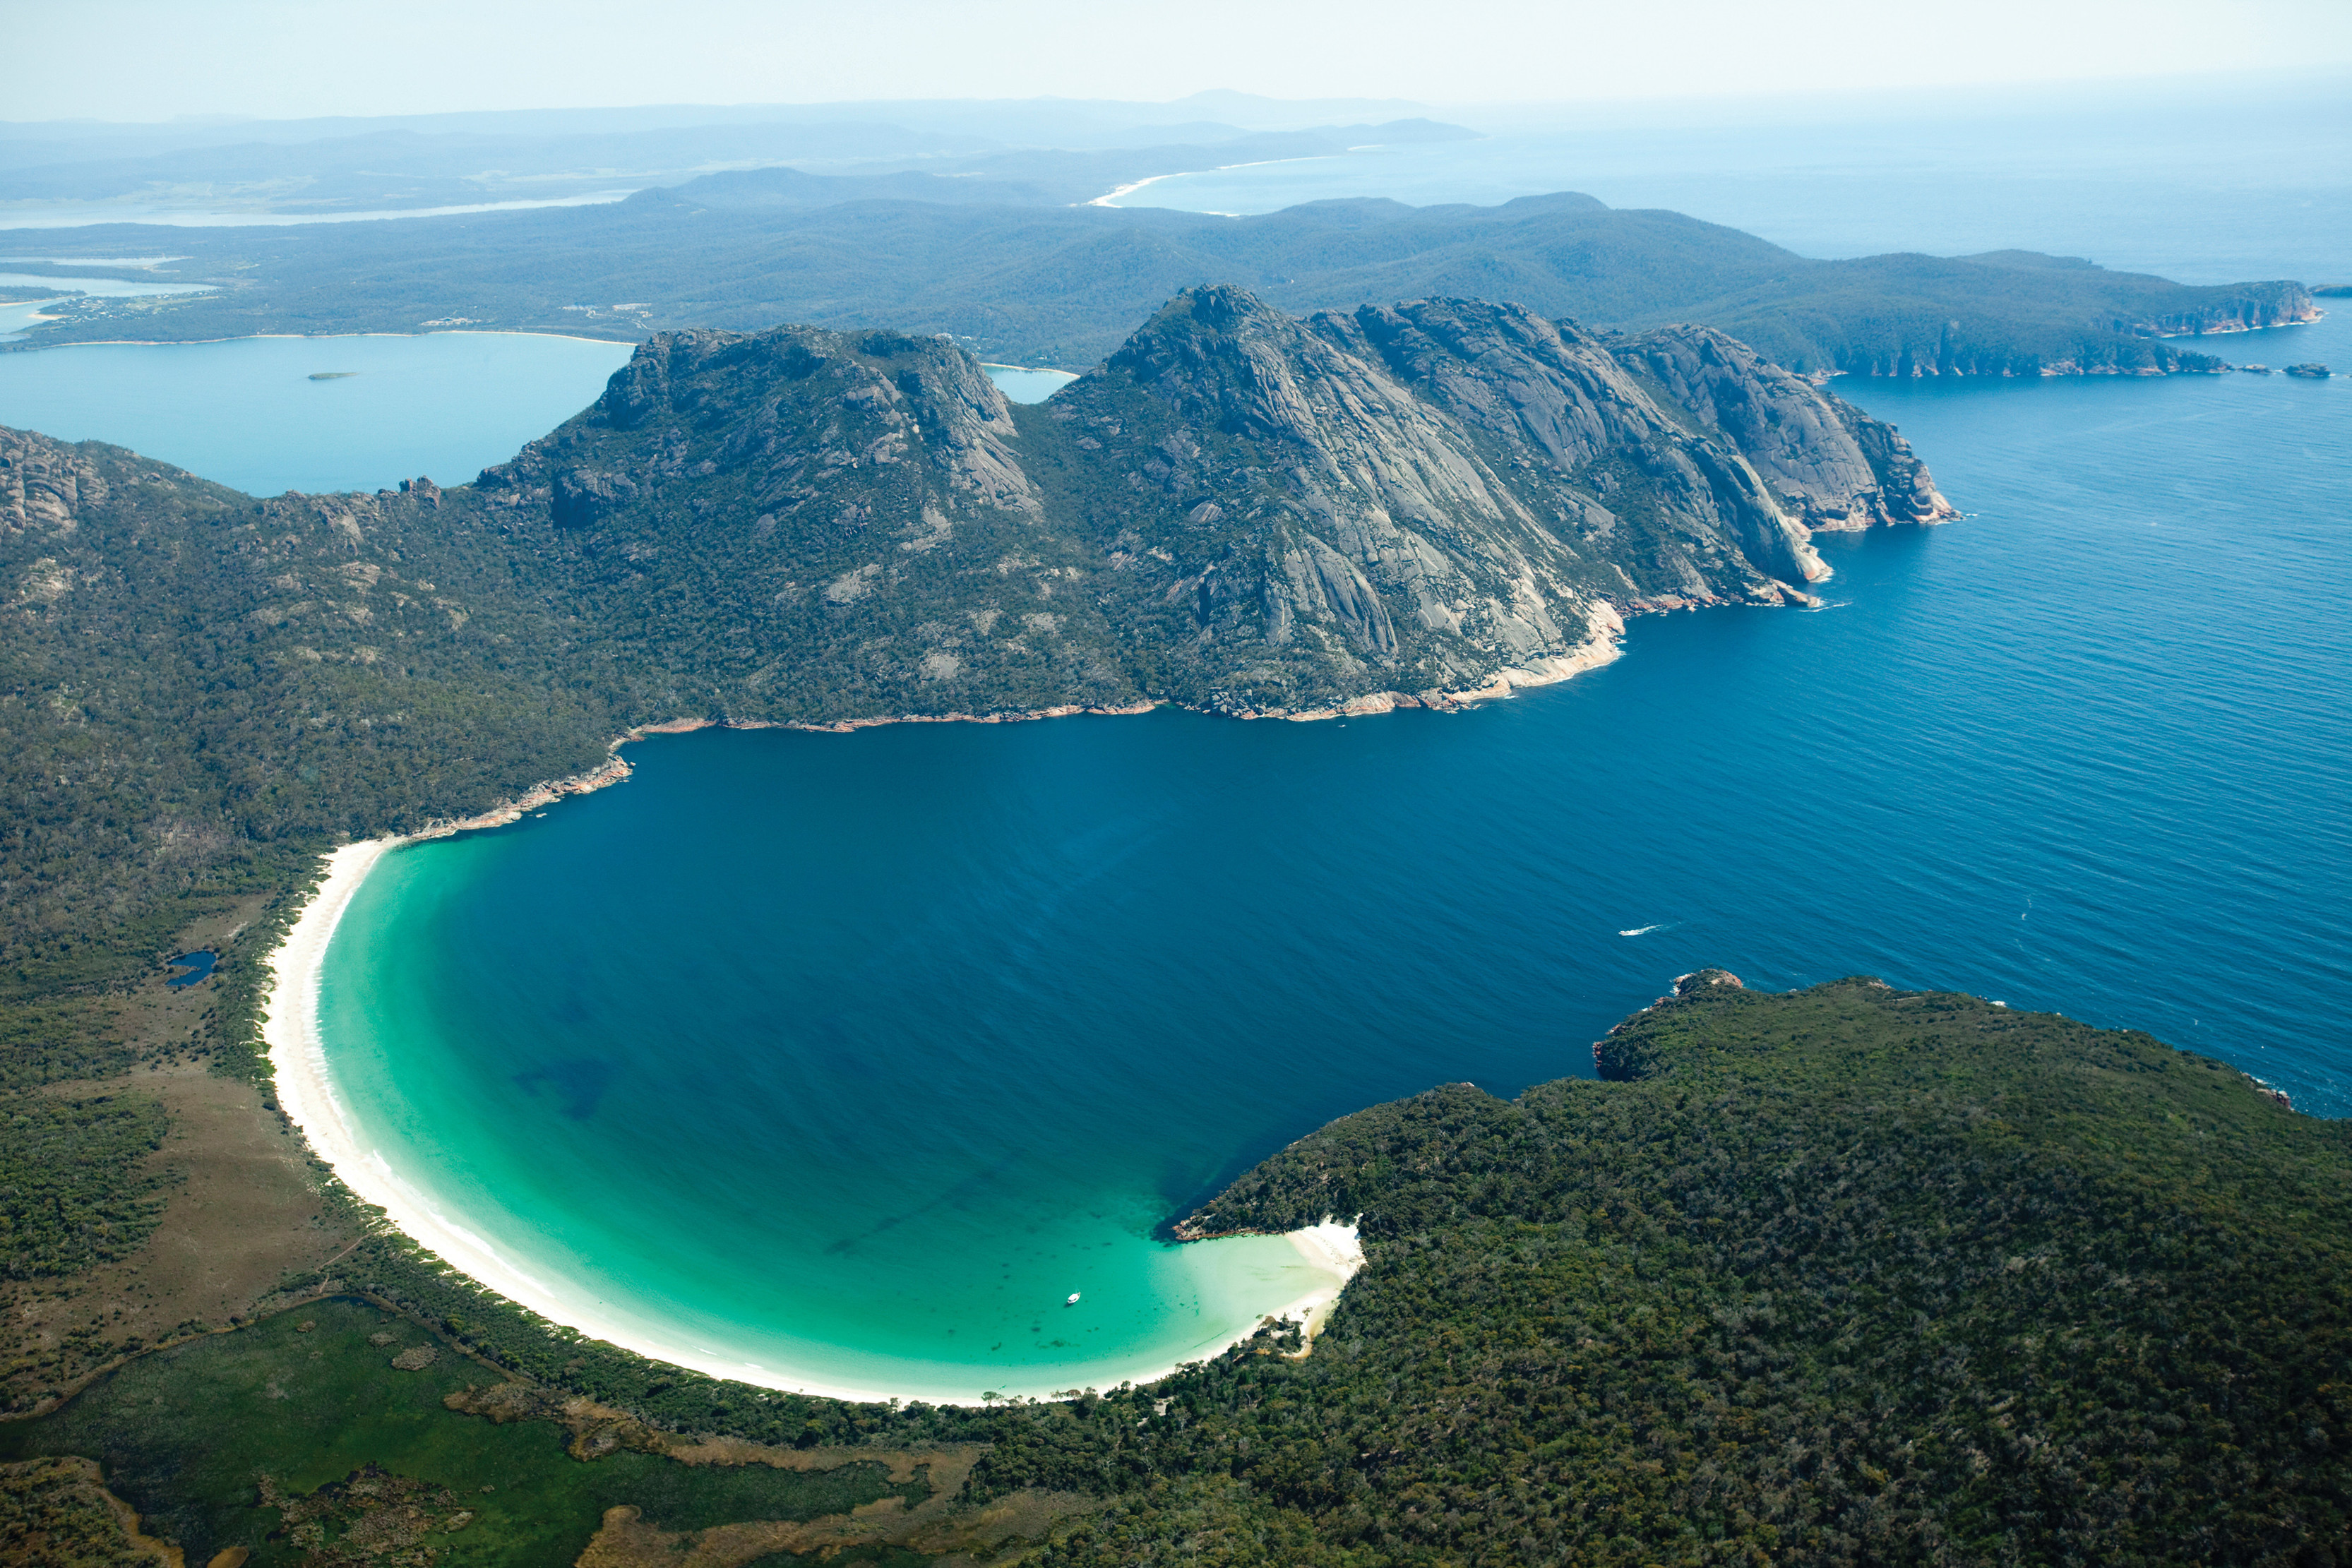 Aerial view of Wineglass Bay, Freycinet National Park, with Mount Mayson, Mount Amos and Mount Dove in the backdrop.